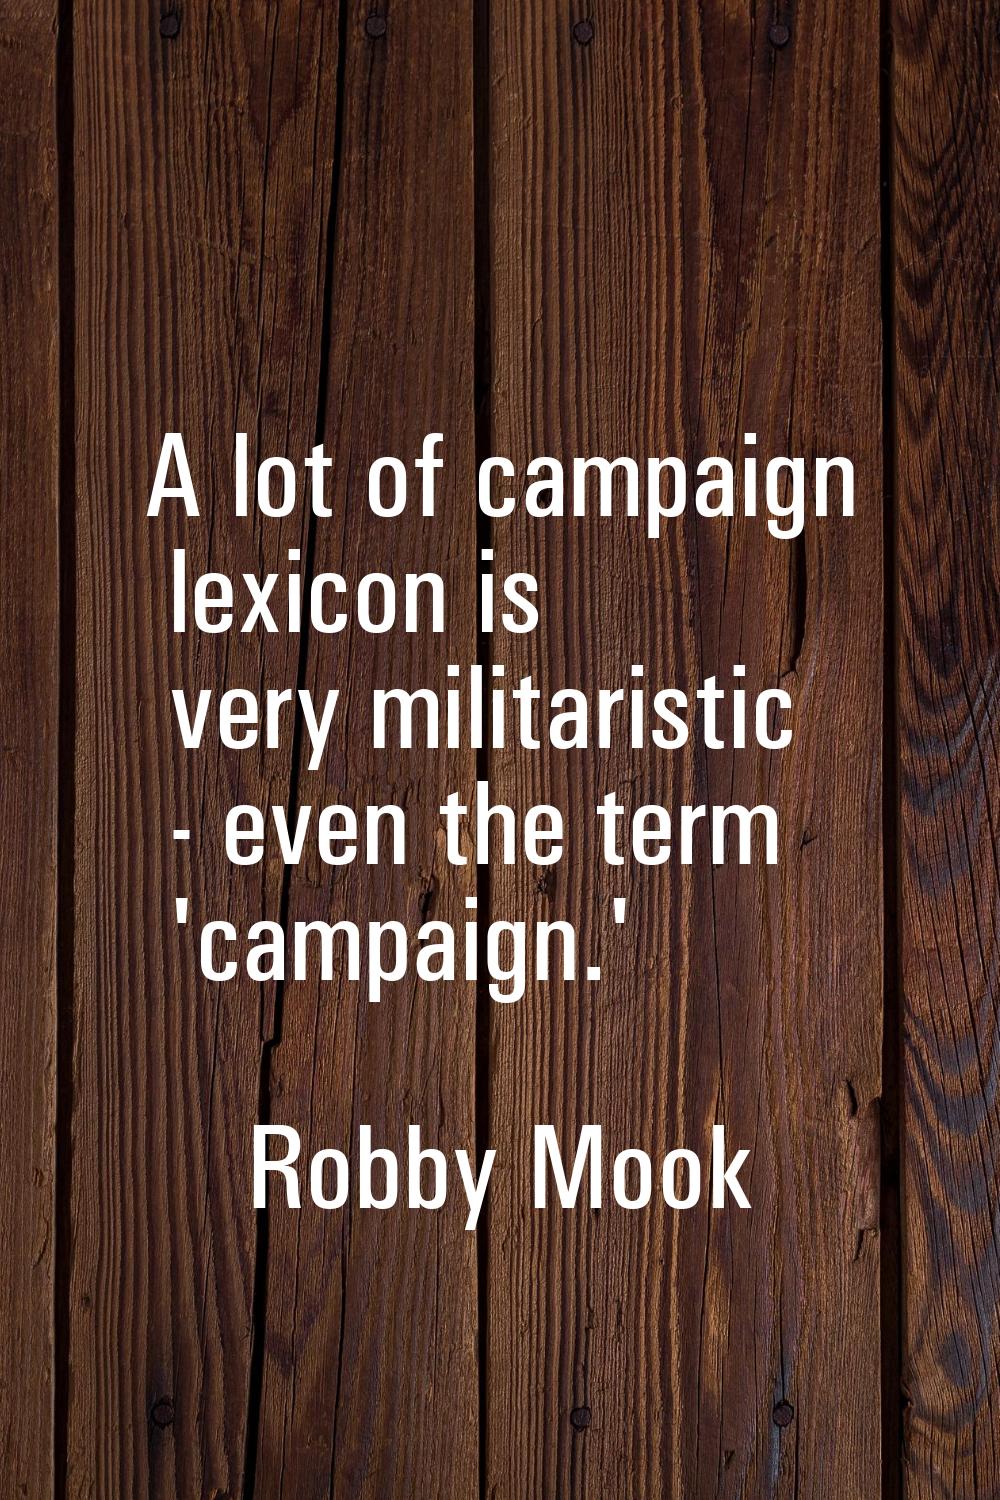 A lot of campaign lexicon is very militaristic - even the term 'campaign.'